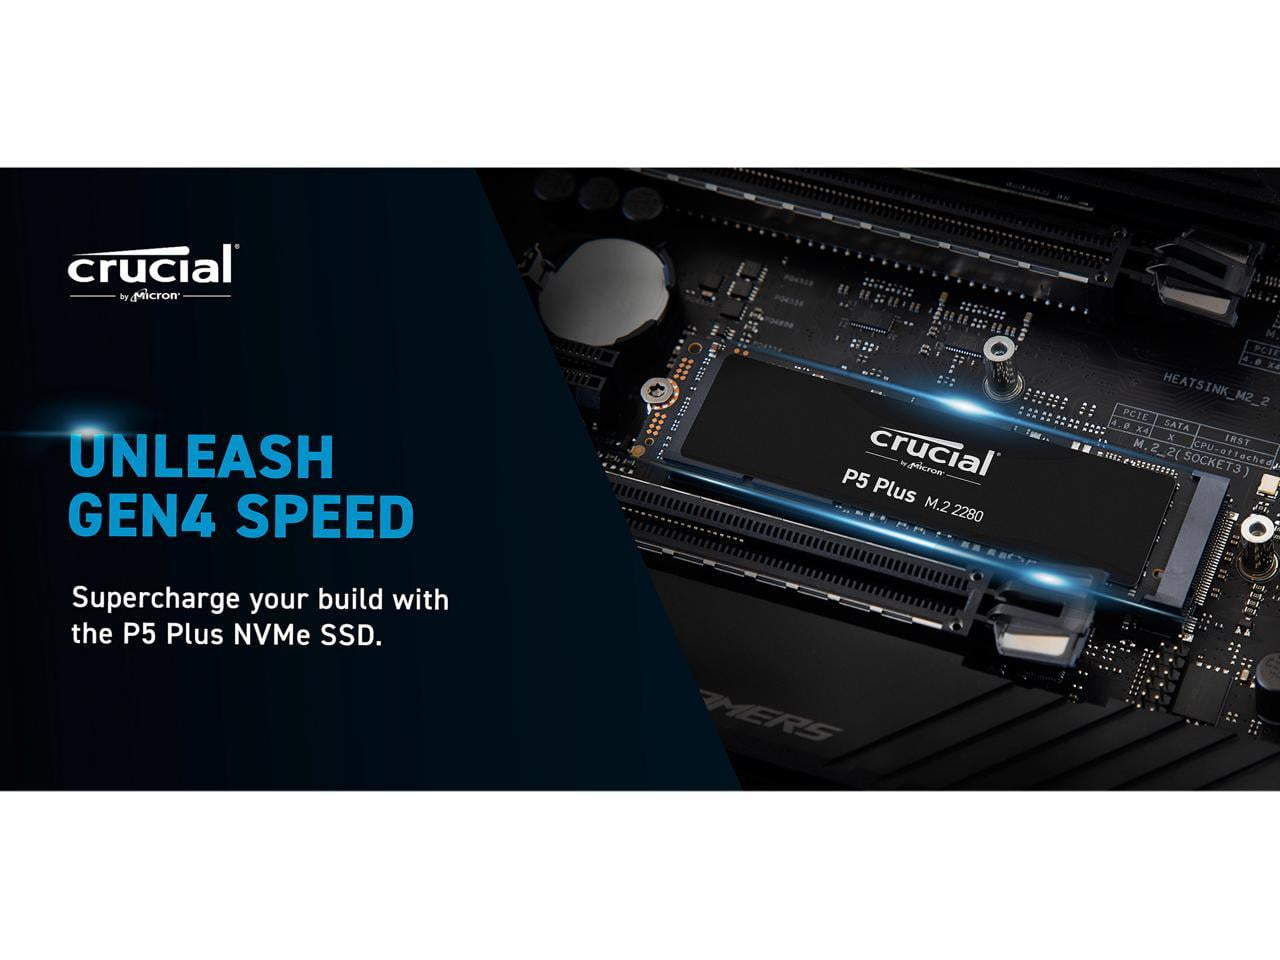 Crucial P5 Plus 1TB PCIe Gen4 3D NAND NVMe M.2 Gaming SSD, up to 6600MB/s -  CT1000P5PSSD8 Solid State Drive